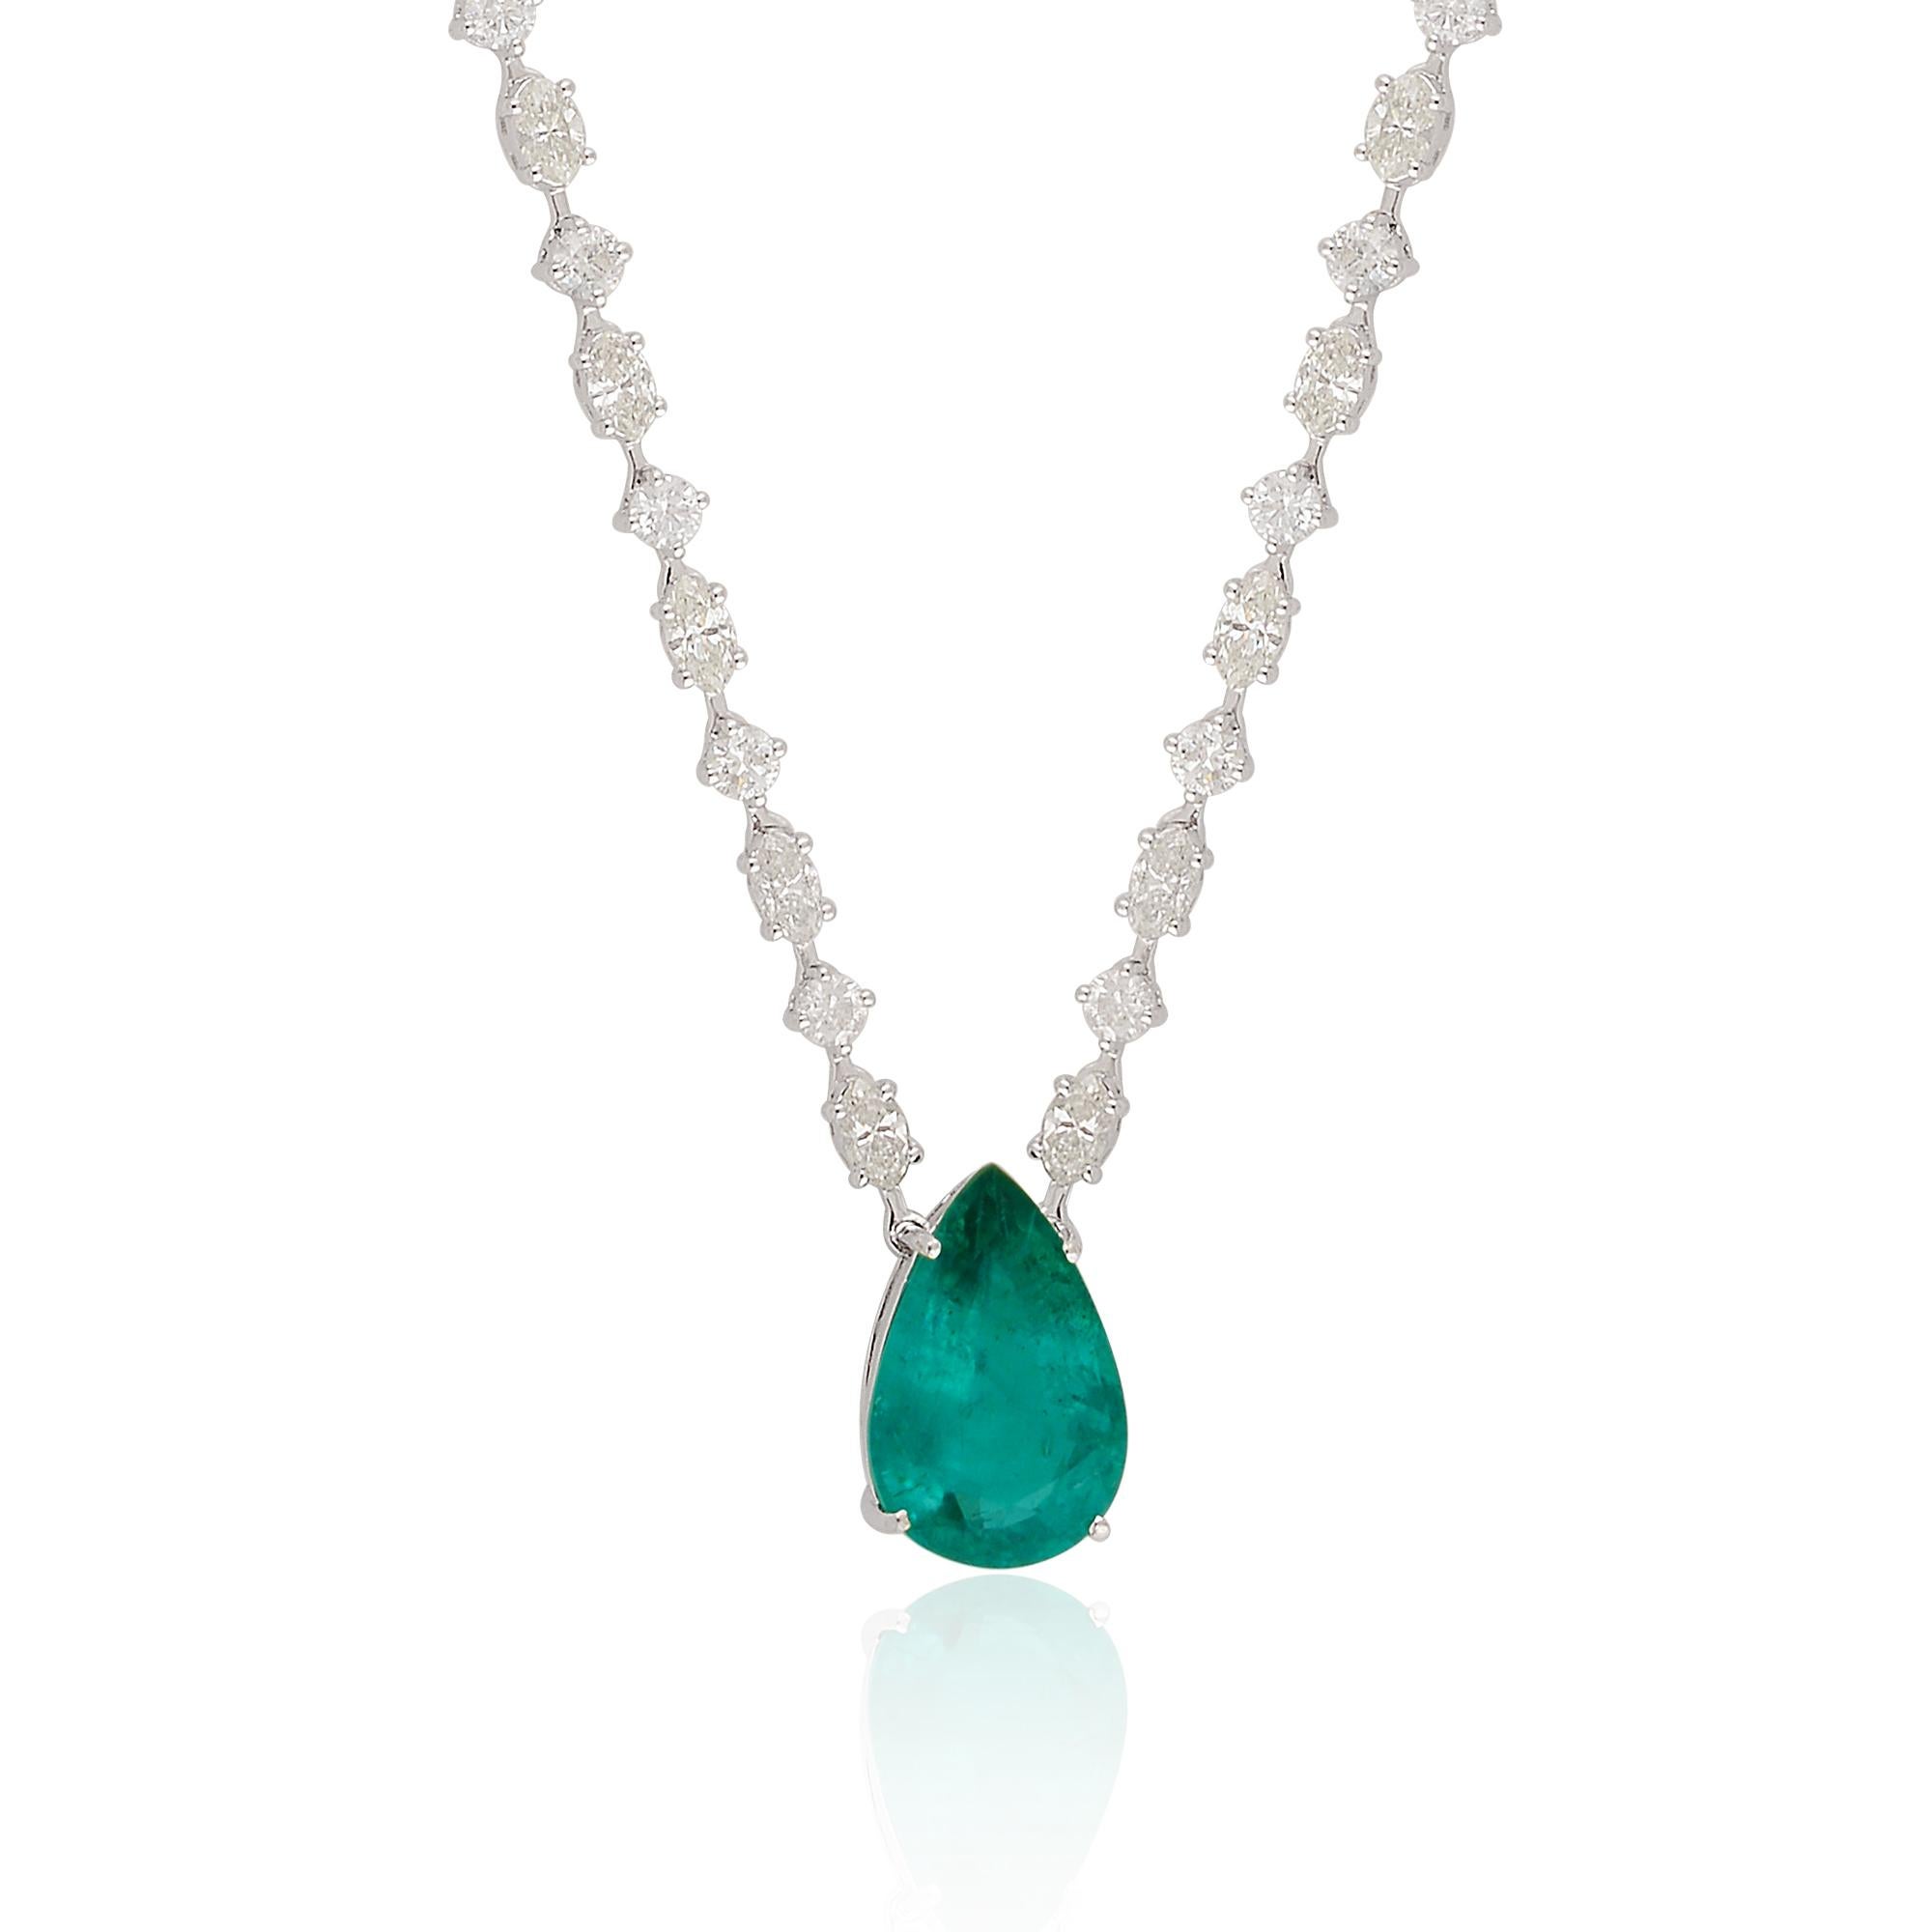 This pear Zambian emerald gemstone pendant fine necklace with diamond accents is a true testament to fine craftsmanship and exceptional gemstone selection. It exudes sophistication and luxury, making it a versatile piece that can be worn for special